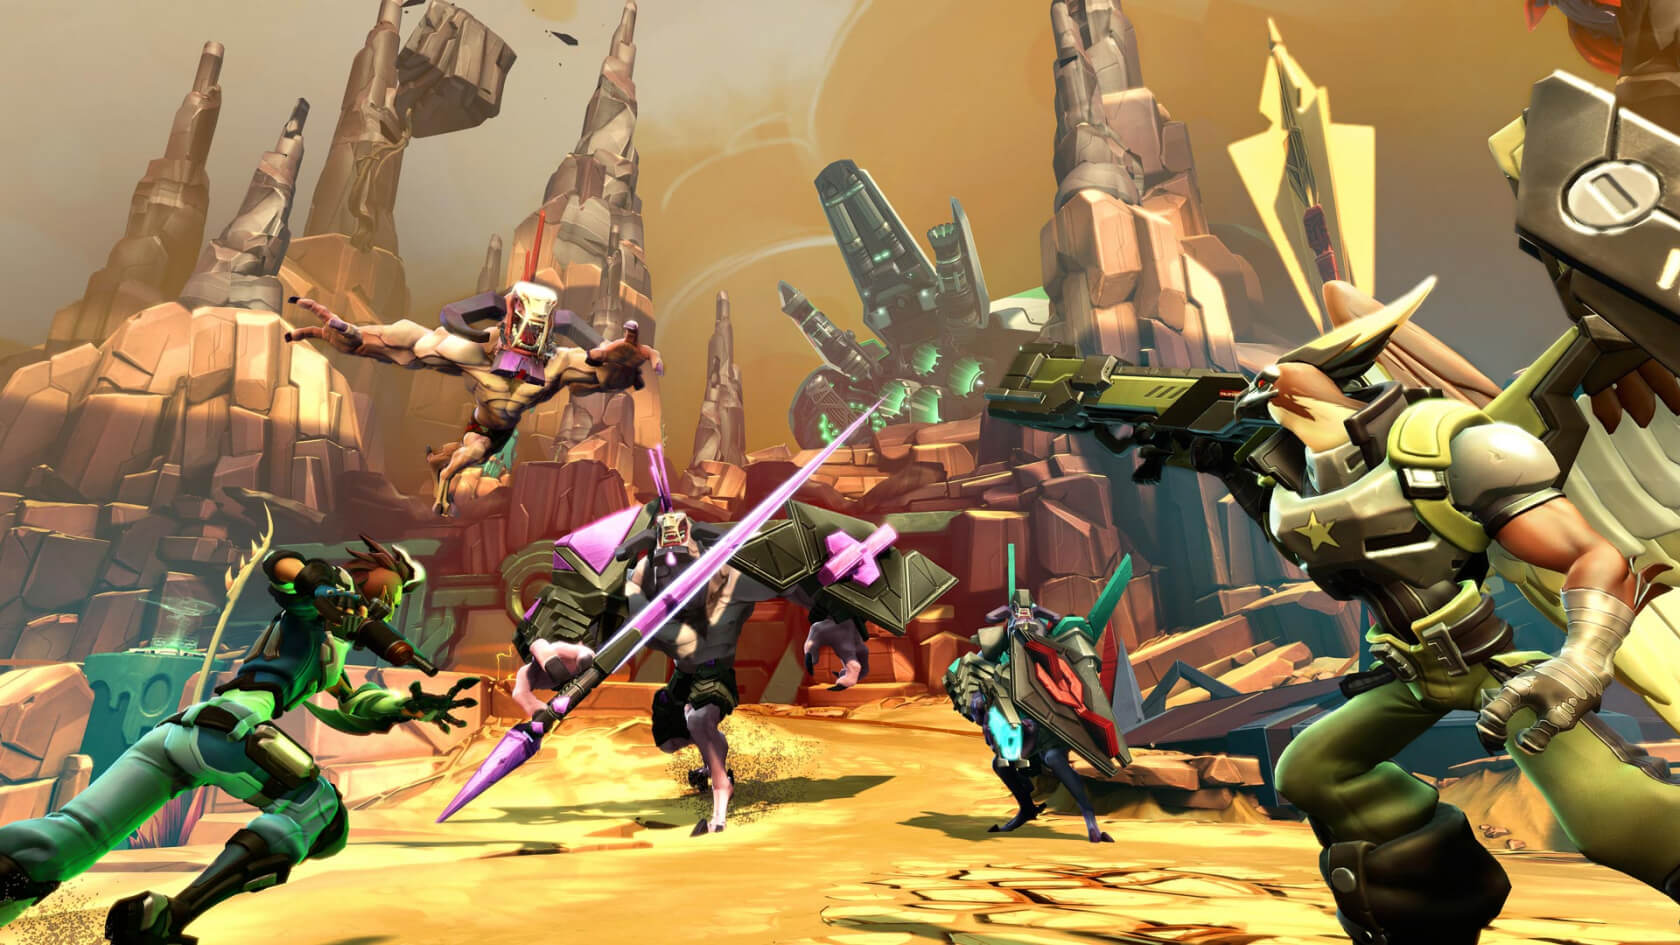 After less that two years online, Battleborn is coming to an end